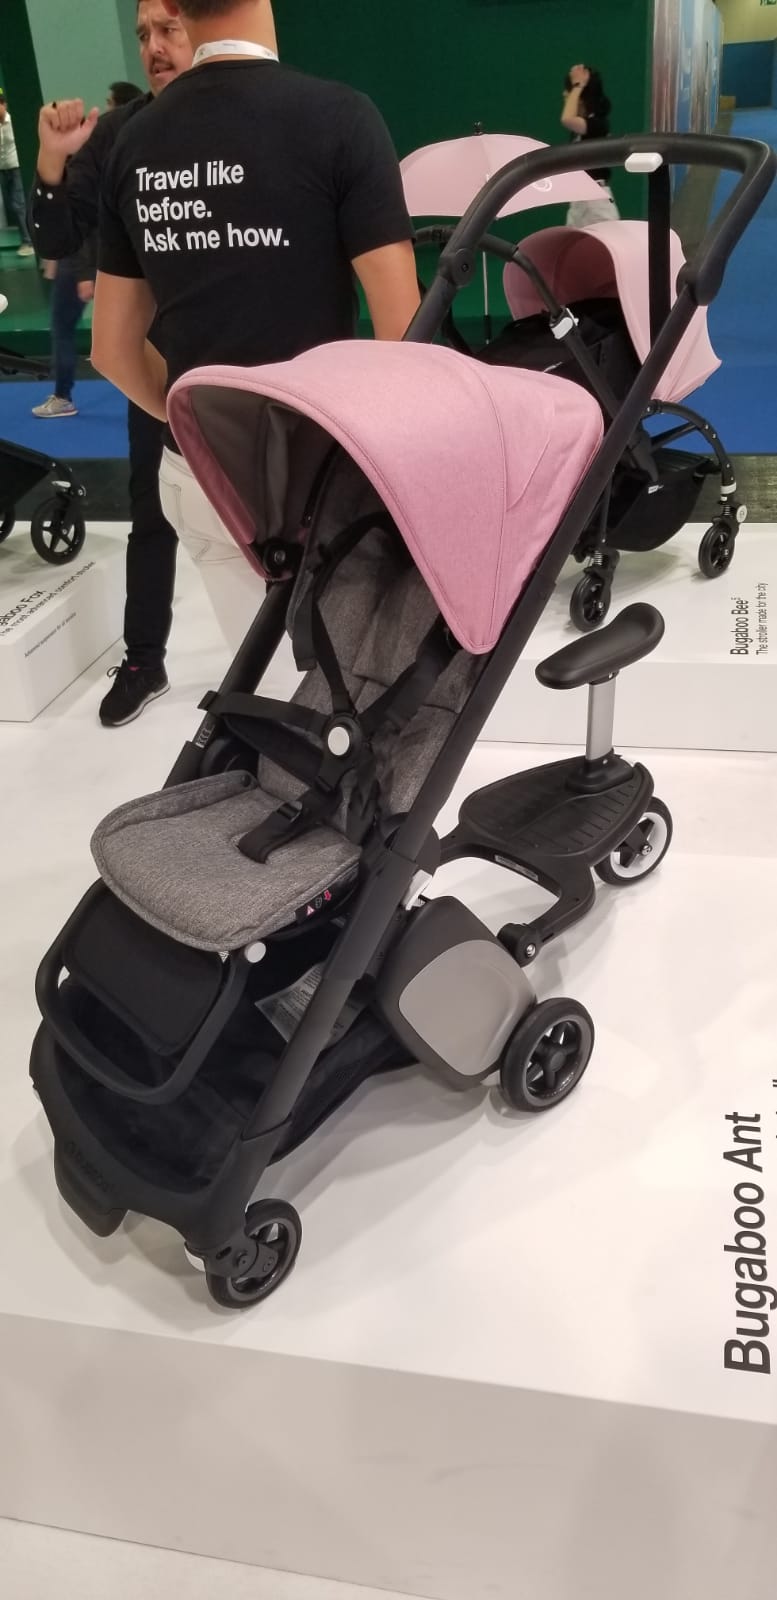 NEW Bugaboo Ant 2020 Stroller Accessories! - Full review on what's new